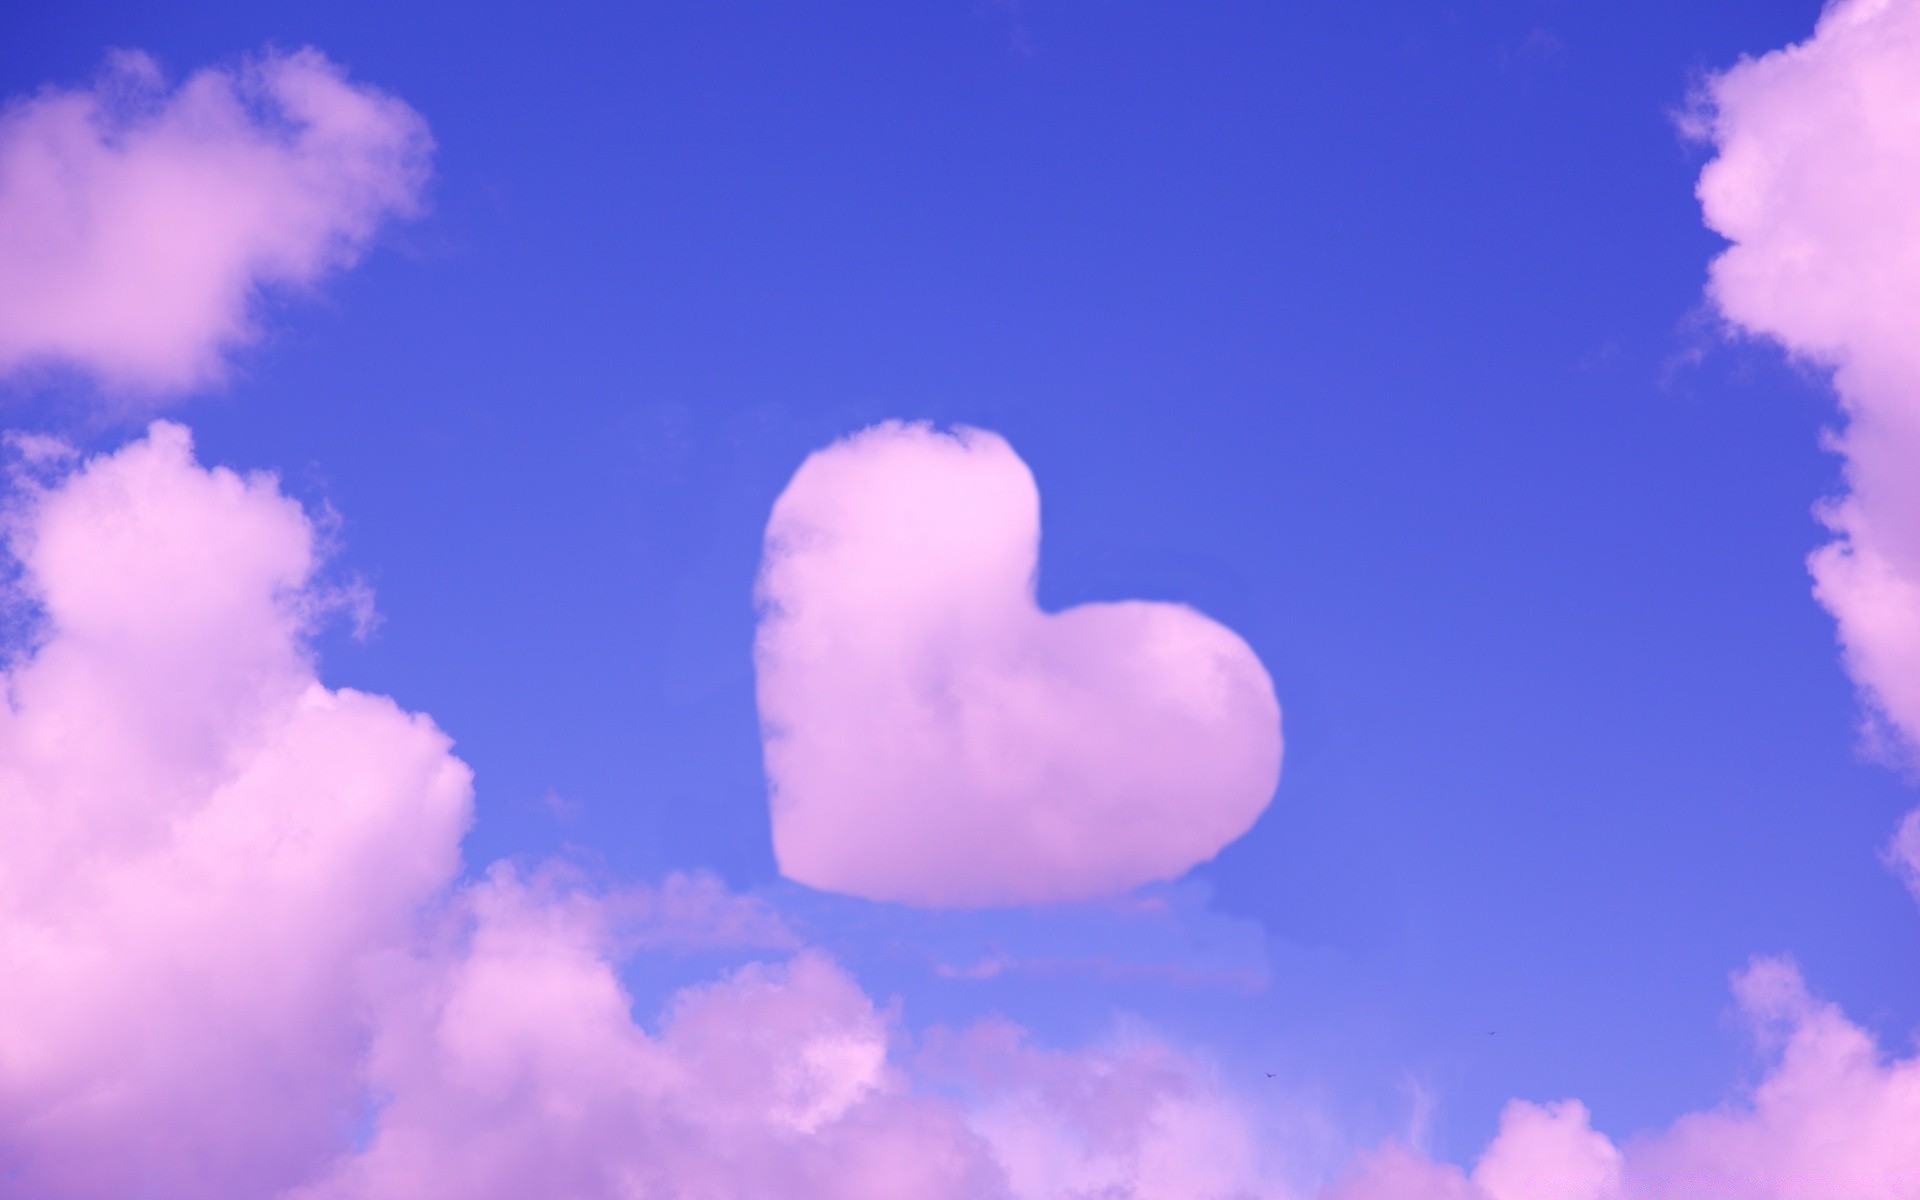 hearts weather sky meteorology downy nature daylight desktop bright space color cloud heaven outdoors light fair weather atmosphere air abstract cloudy